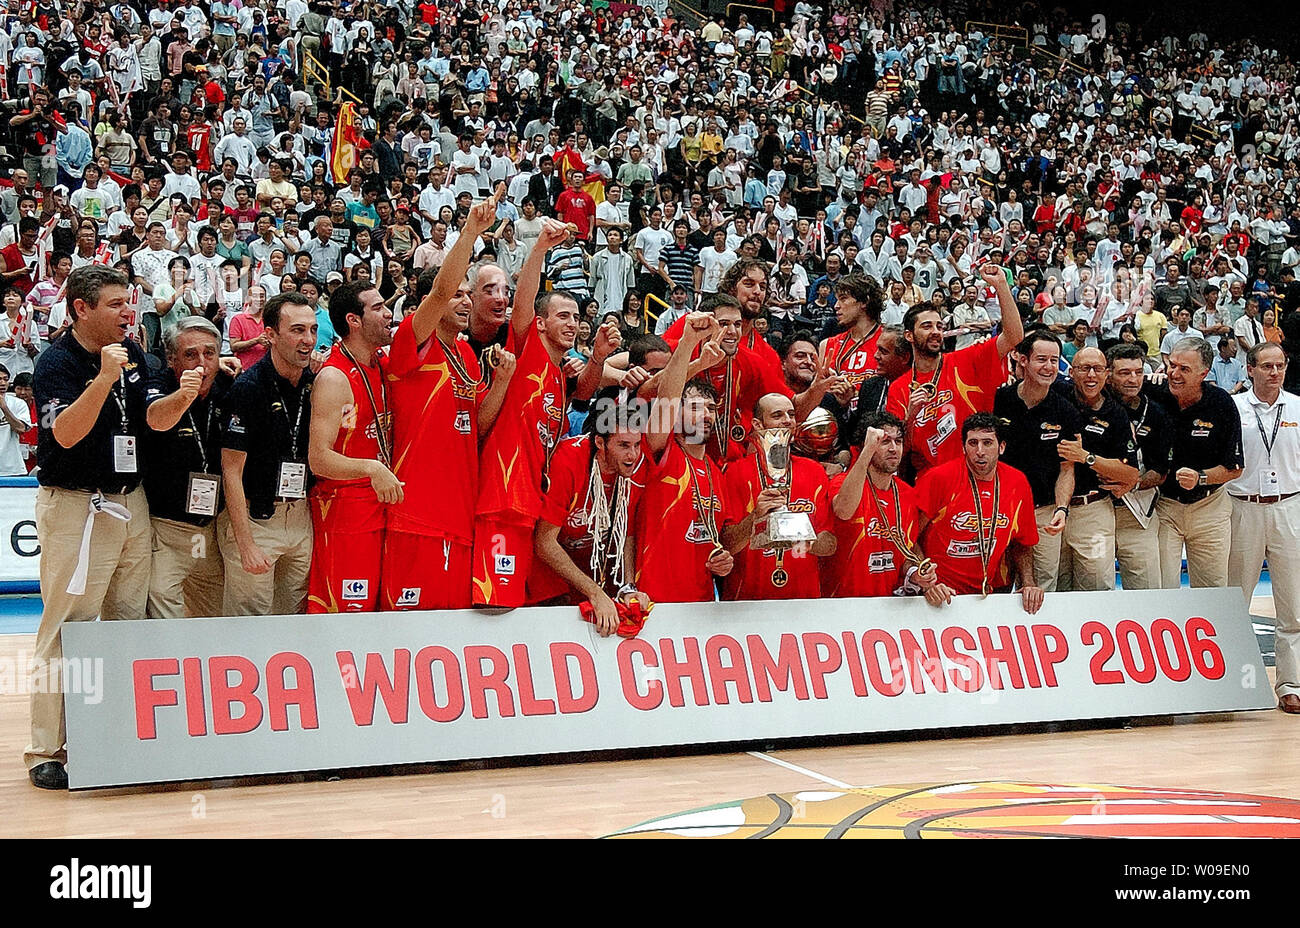 Spanish players with coaches and staff celebrate their gold medal victory in the finals defeating Greece 70-47 at the FIBA World Basketball Championship, in Saitama, Japan on September 3, 2006.  (UPI Photo/Keizo Mori) Stock Photo